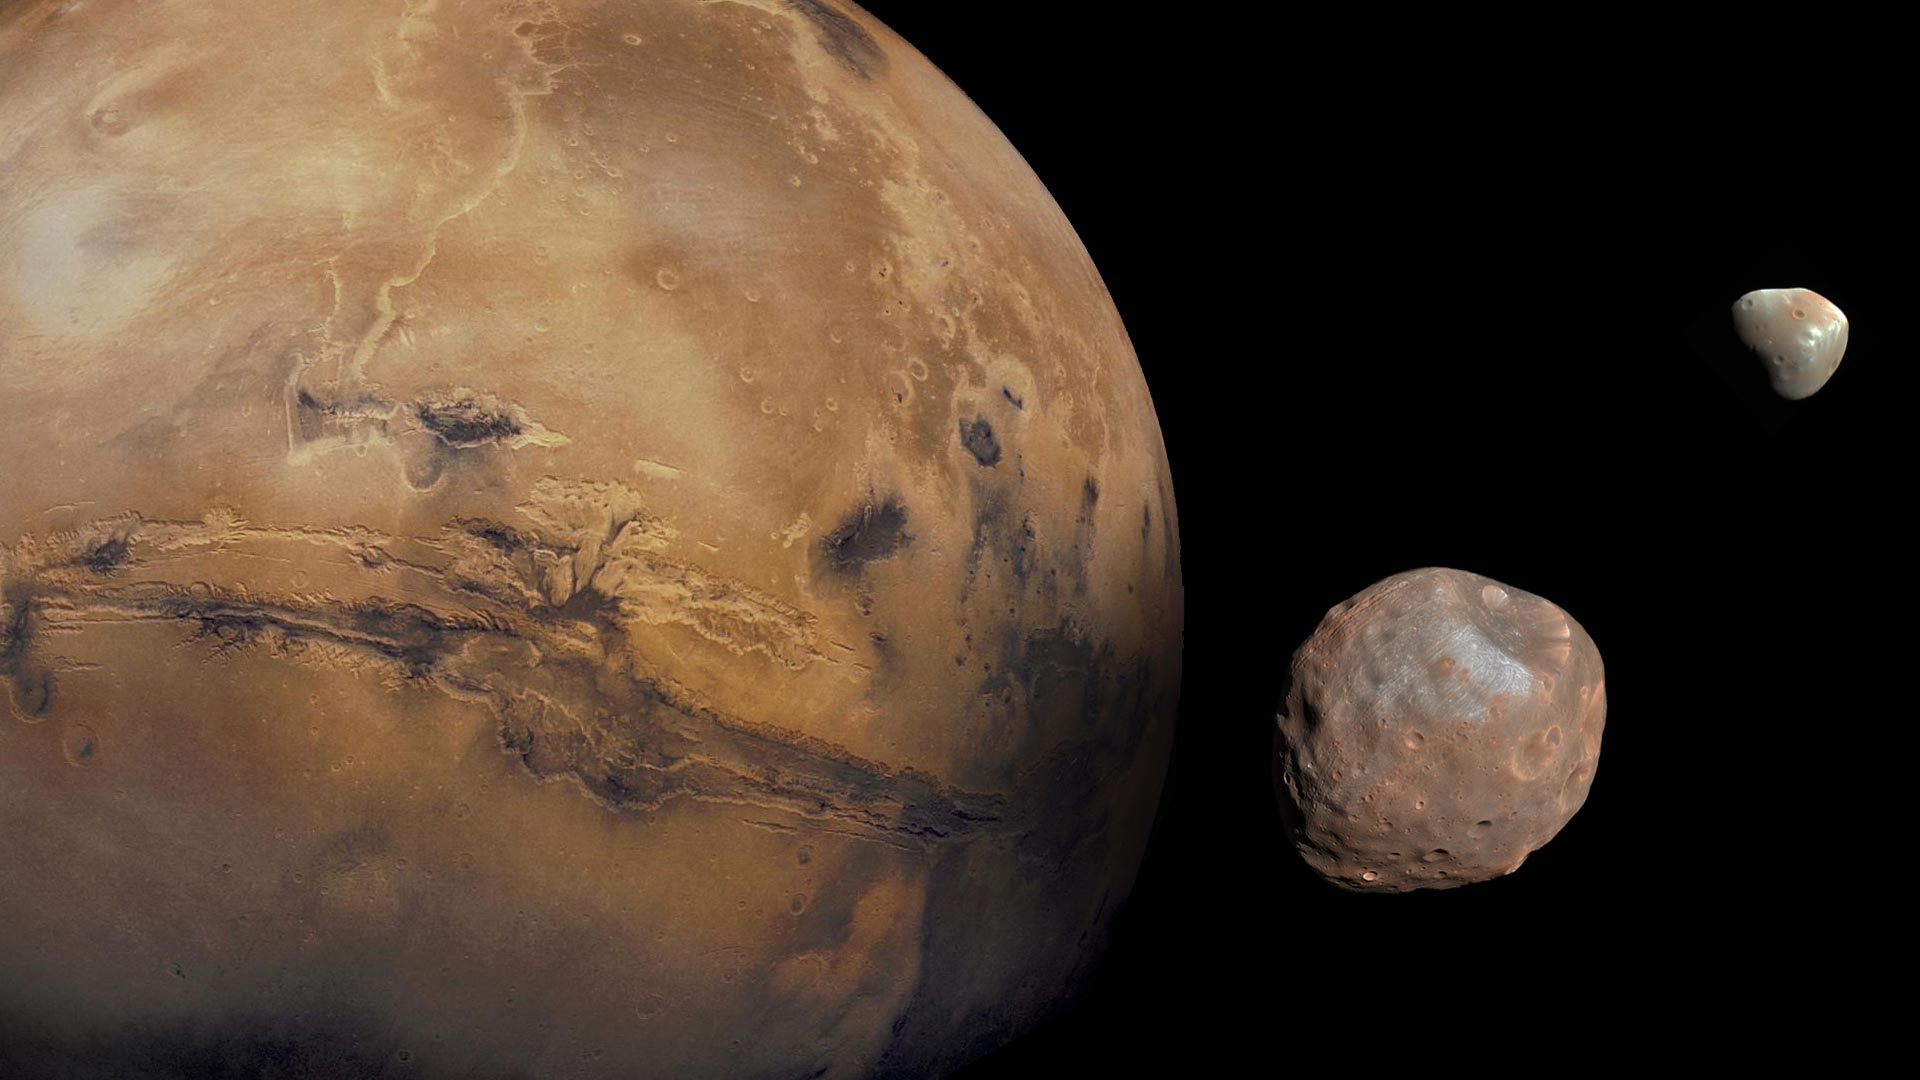 https://scitechdaily.com/images/Moons-of-Mars.jpg